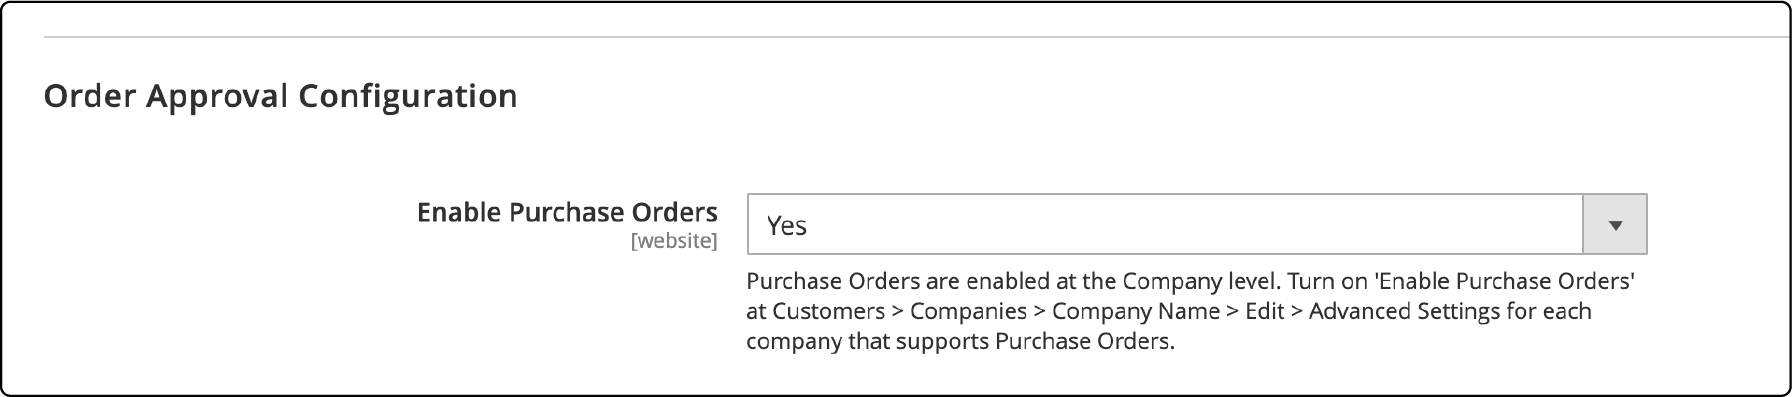 Managing costs and orders with purchase orders in Adobe Commerce B2B